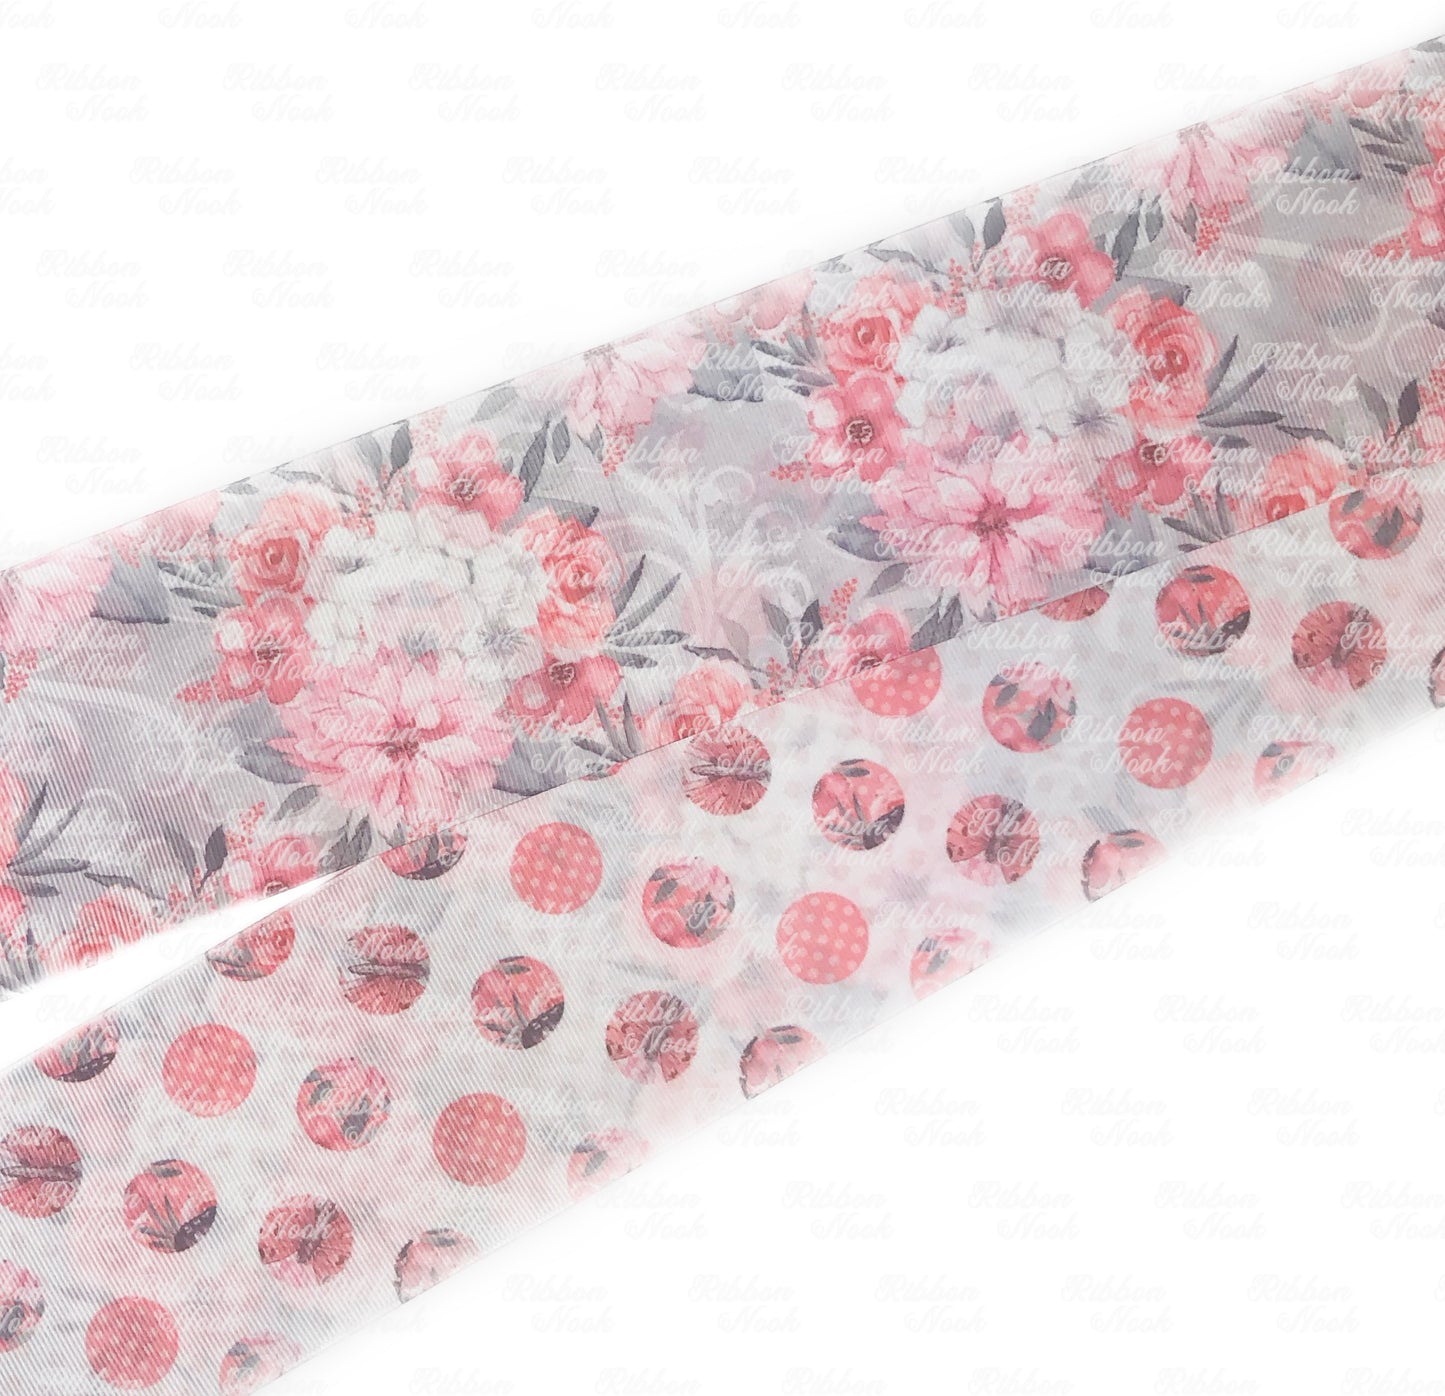 double sided grosgrain ribbon with white hydrangea and coral pink roses